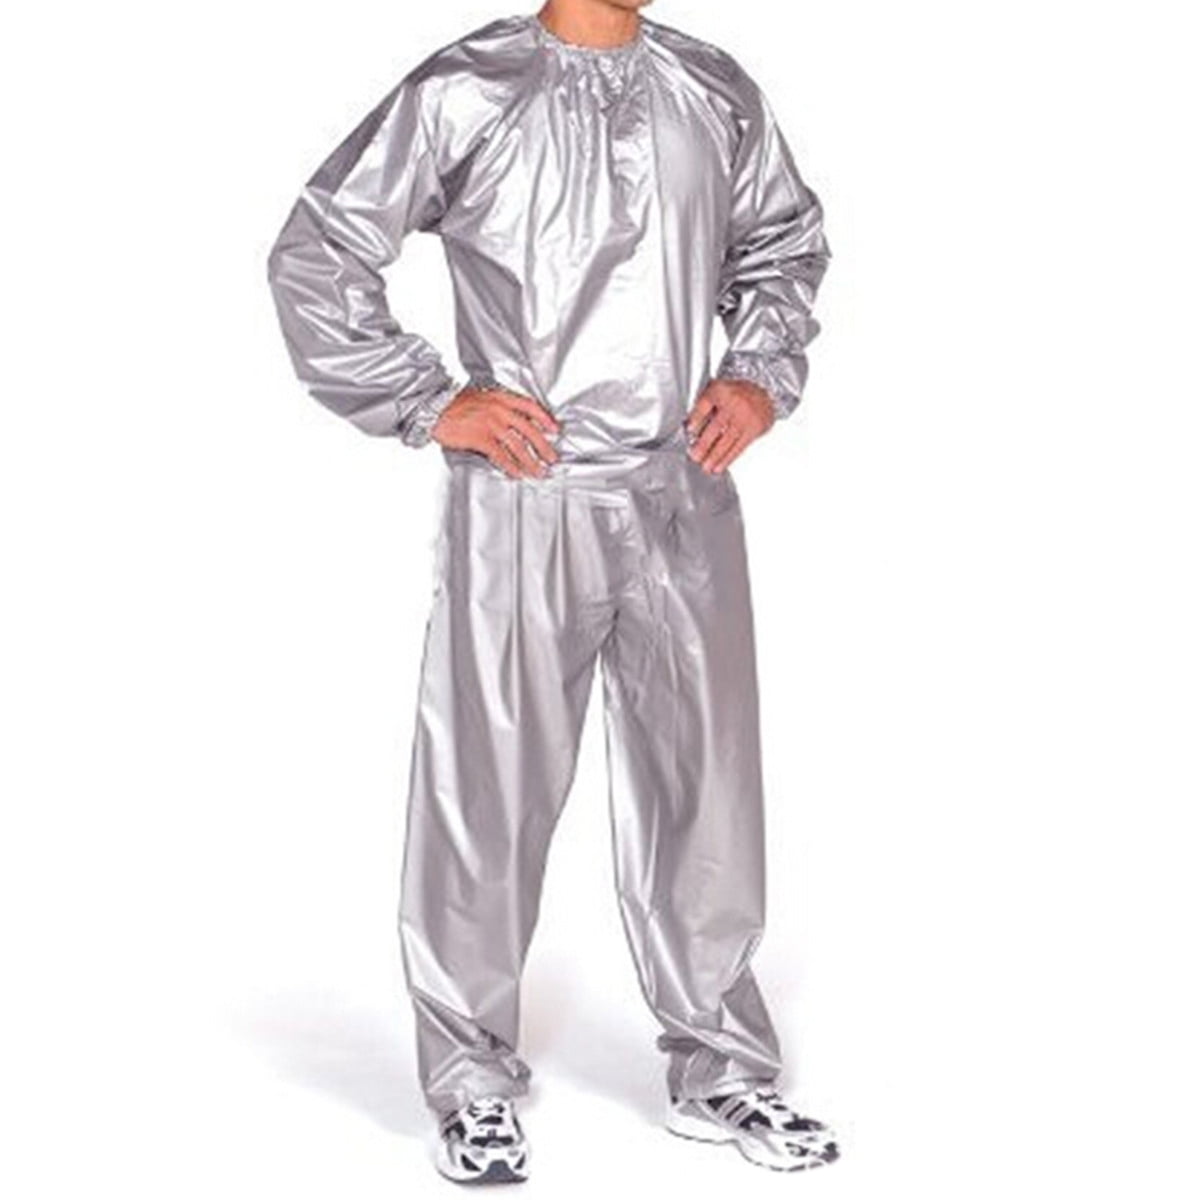 Heavy Duty Fitness Weight Loss Sweat Sauna Suit Exercise Gym Anti-Rip L-4XL 